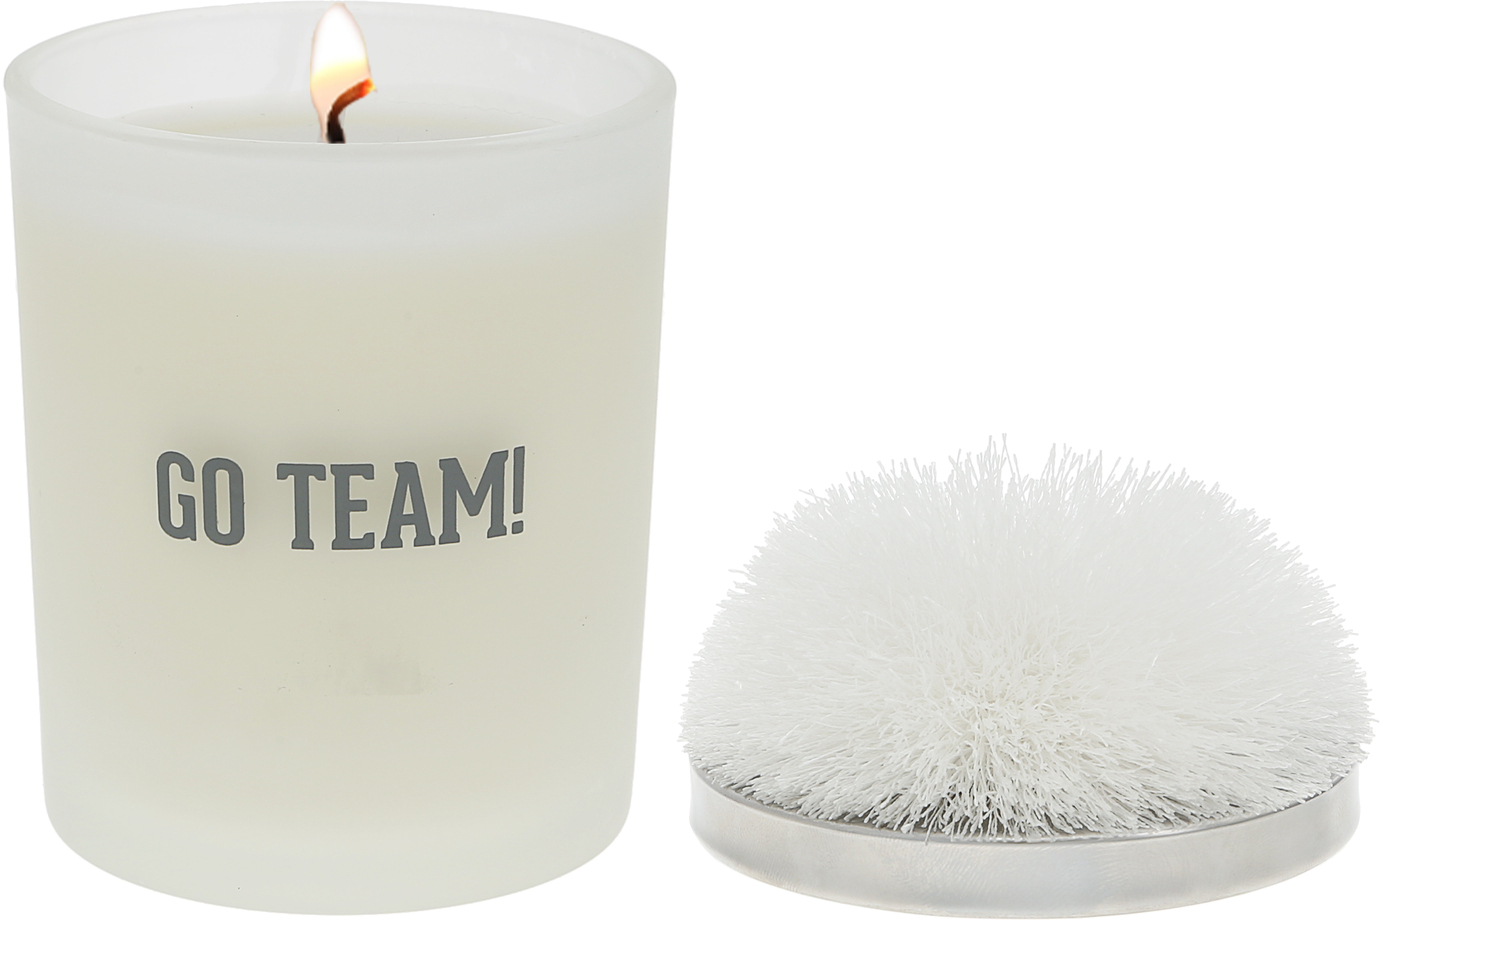 Go Team! - White by Repre-Scent - Go Team! - White - 5.5 oz - 100% Soy Wax Candle with Pom Pom Lid
Scent: Tranquility